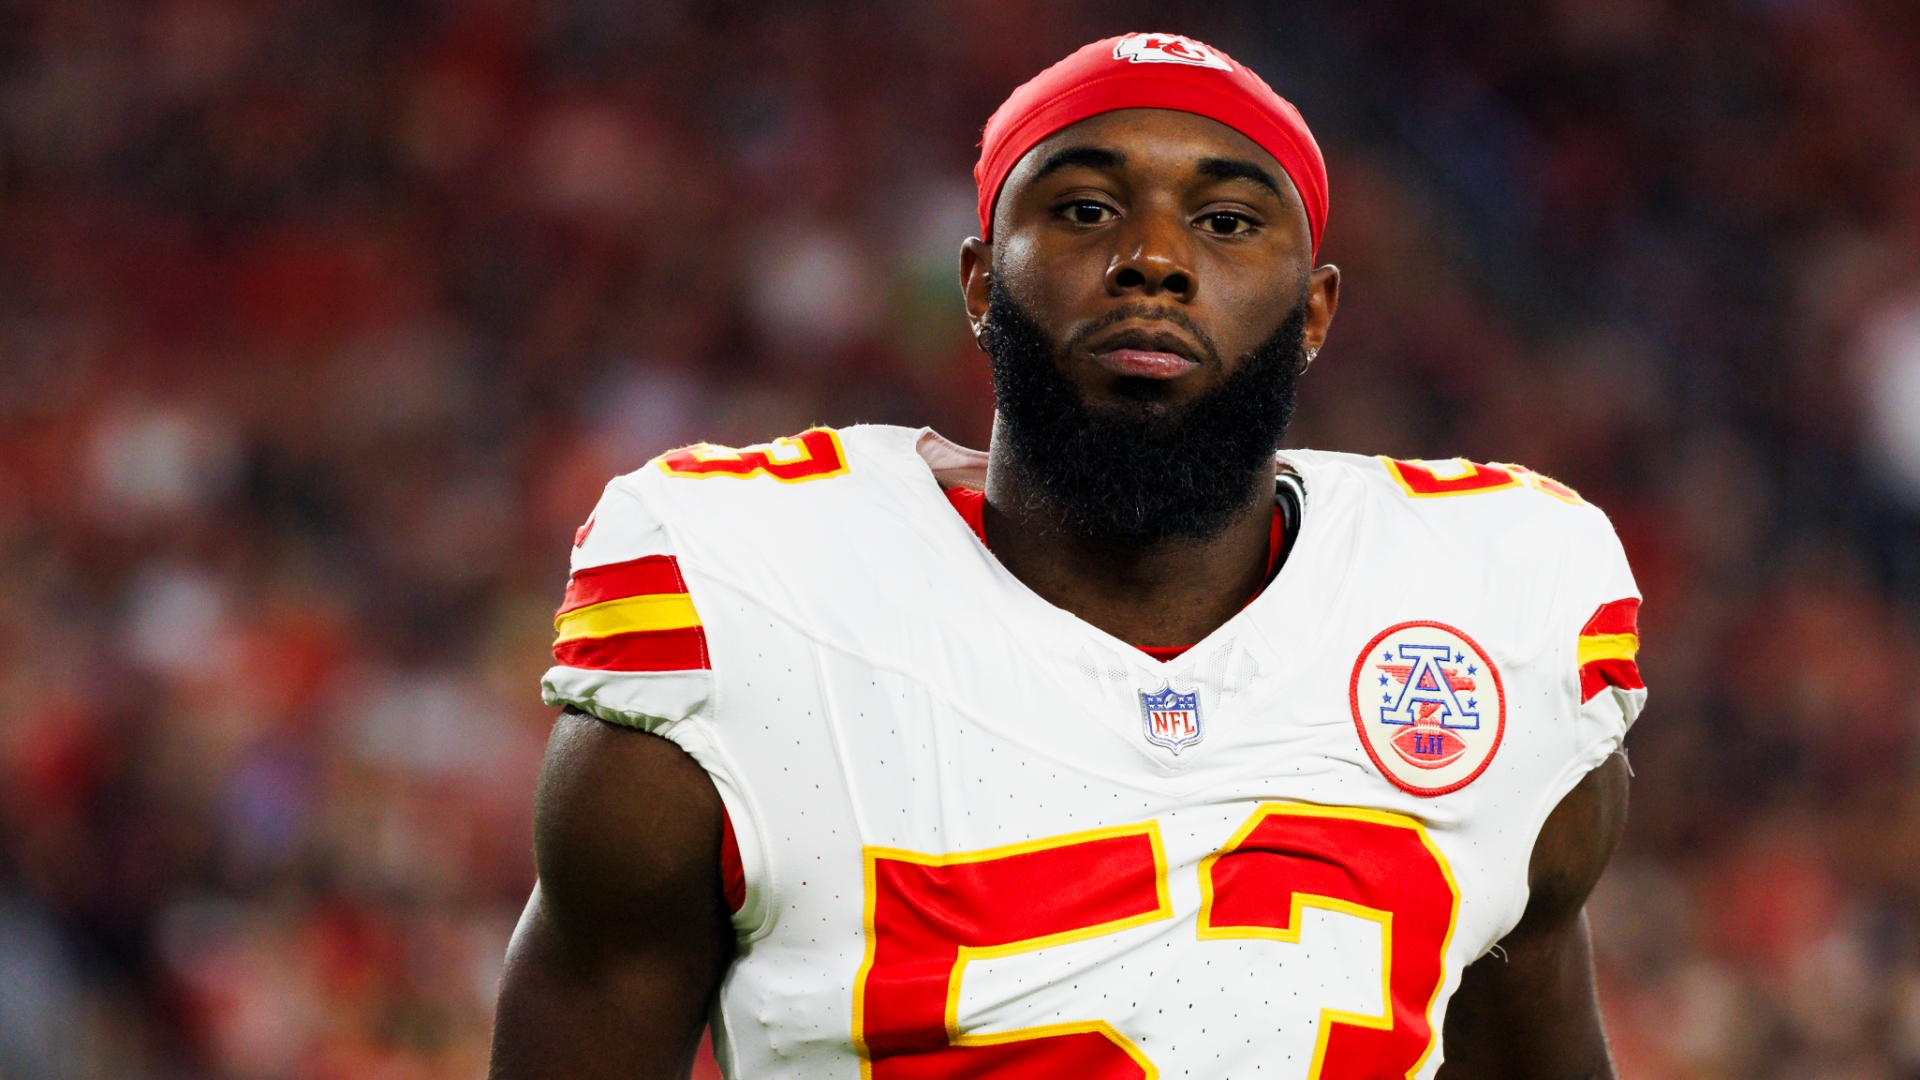 Chiefs' BJ Thompson awake and responsive after cardiac event